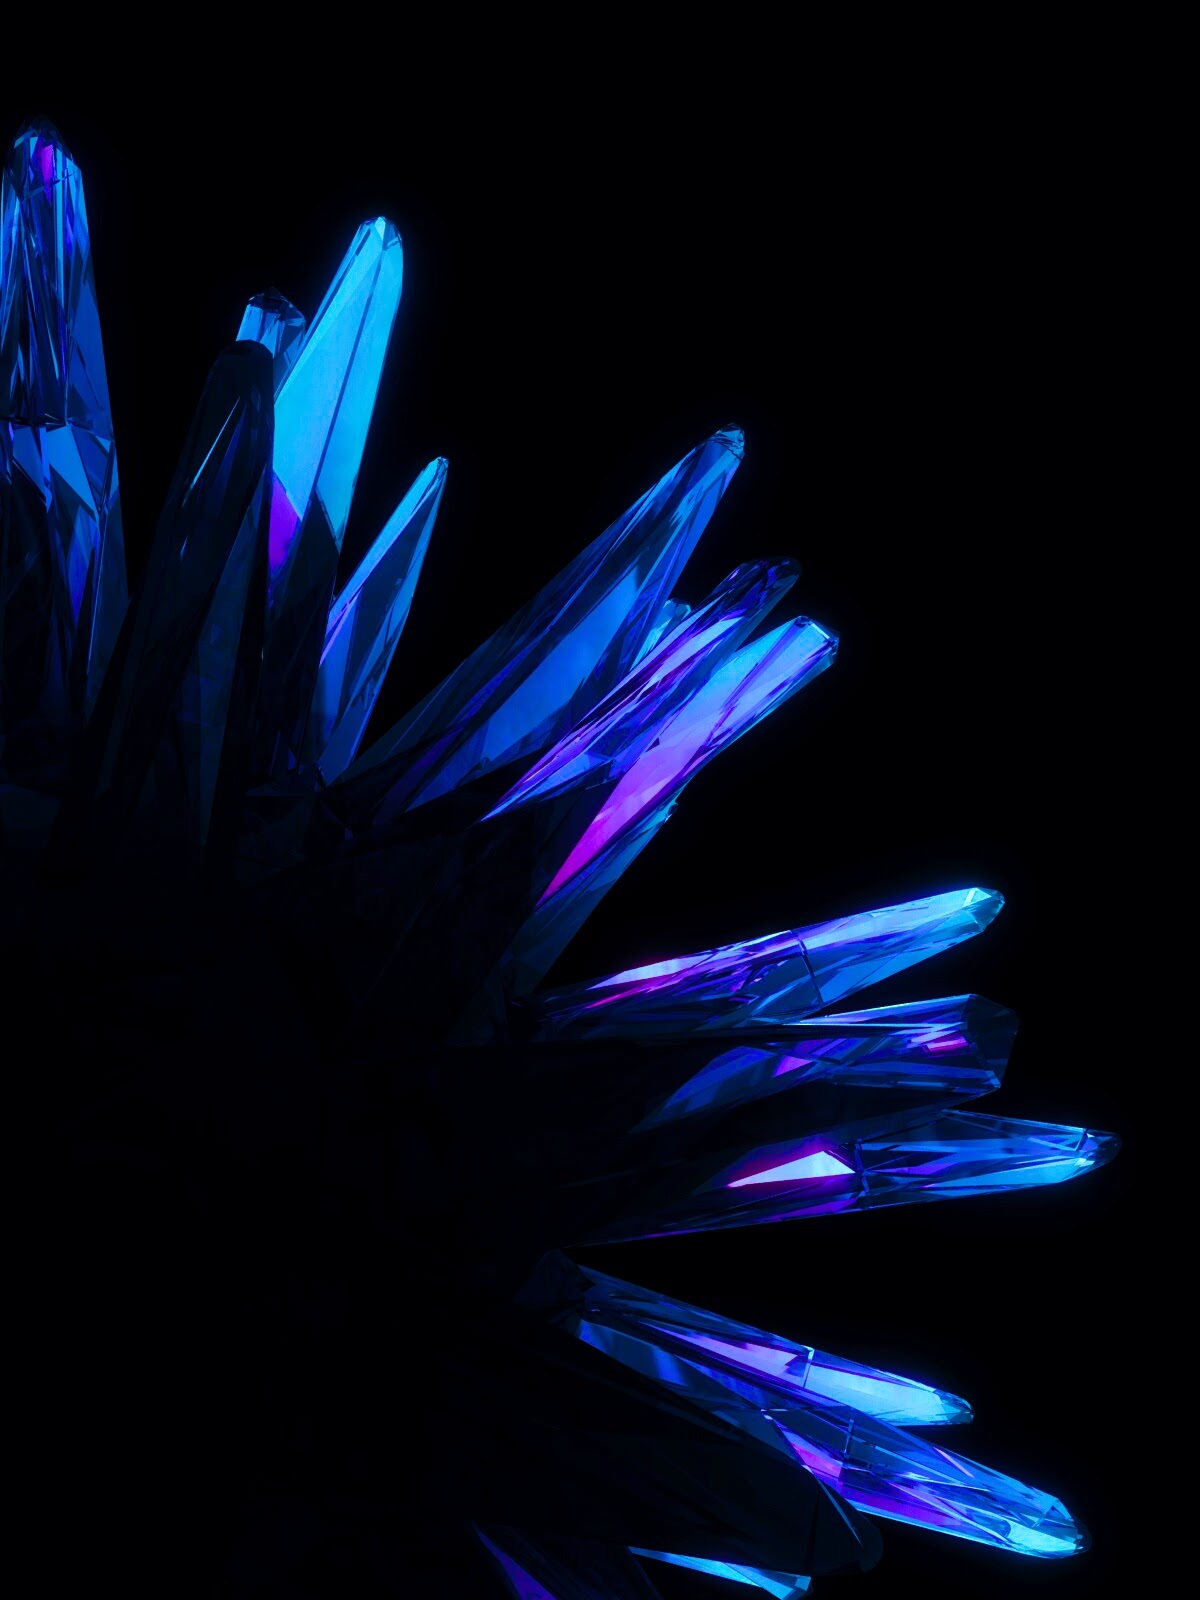 Awesome Black Wallpapers For Iphone X S Oled Screen - Blue And Purple Amoled - HD Wallpaper 